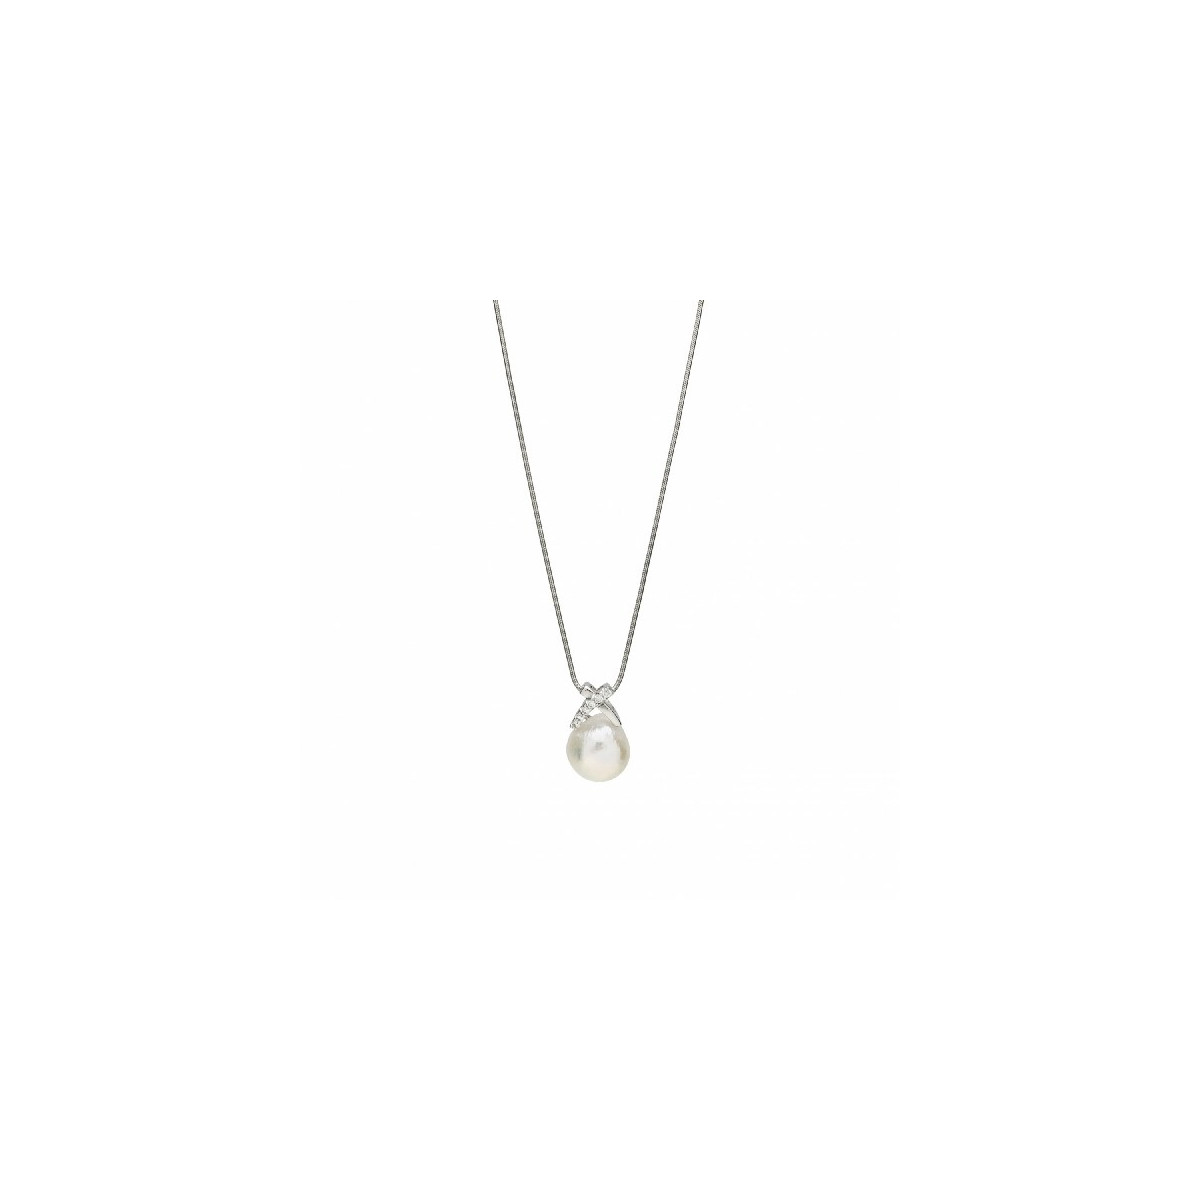 PEARL LINEARGENT NECKLACE - 15448-PE